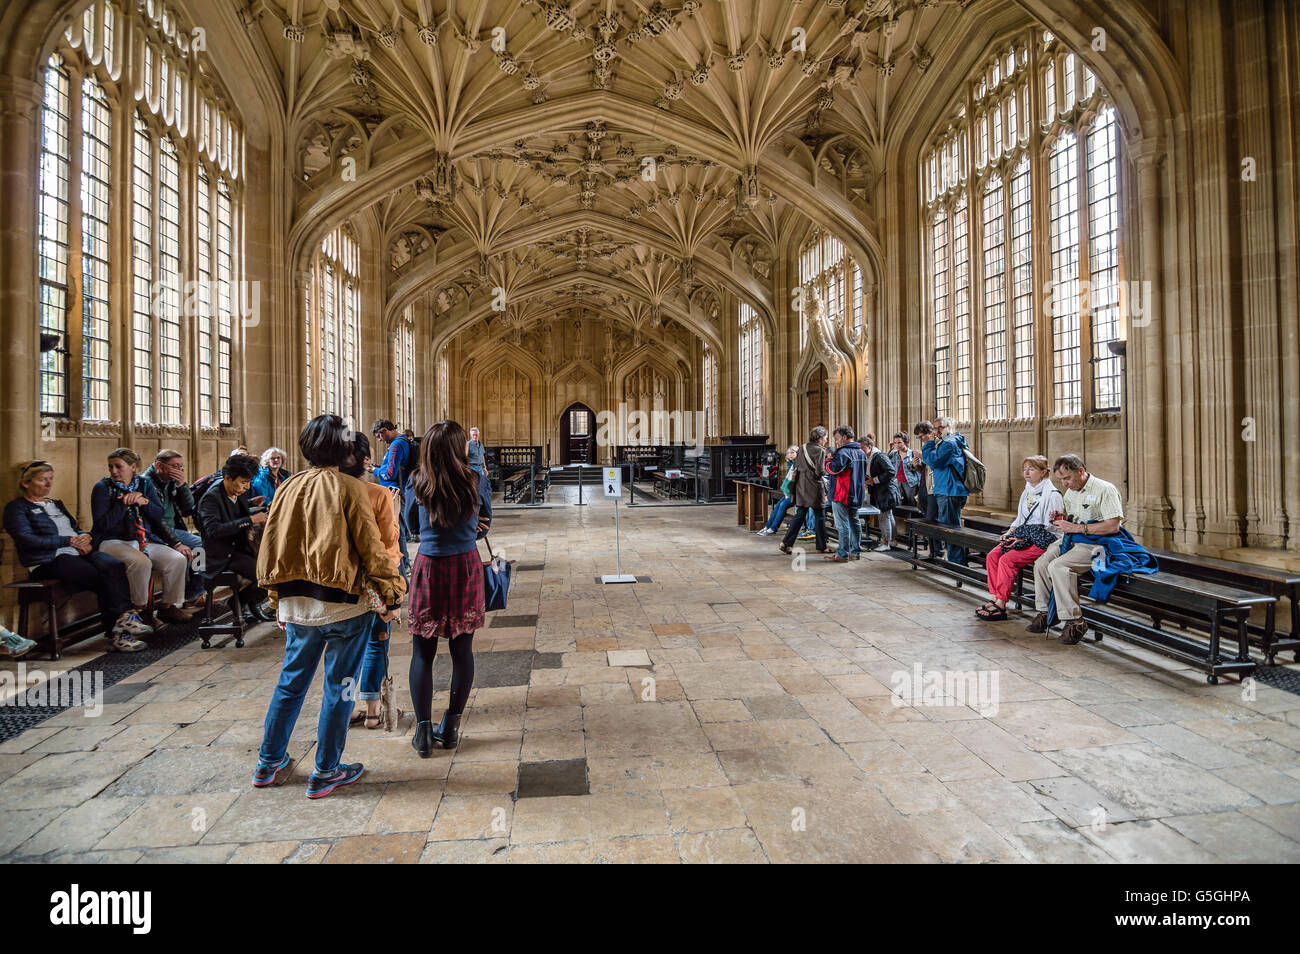 Oxford, UK - August 14, 2015: Interior of Bodleian Library with tourists. Stock Photo